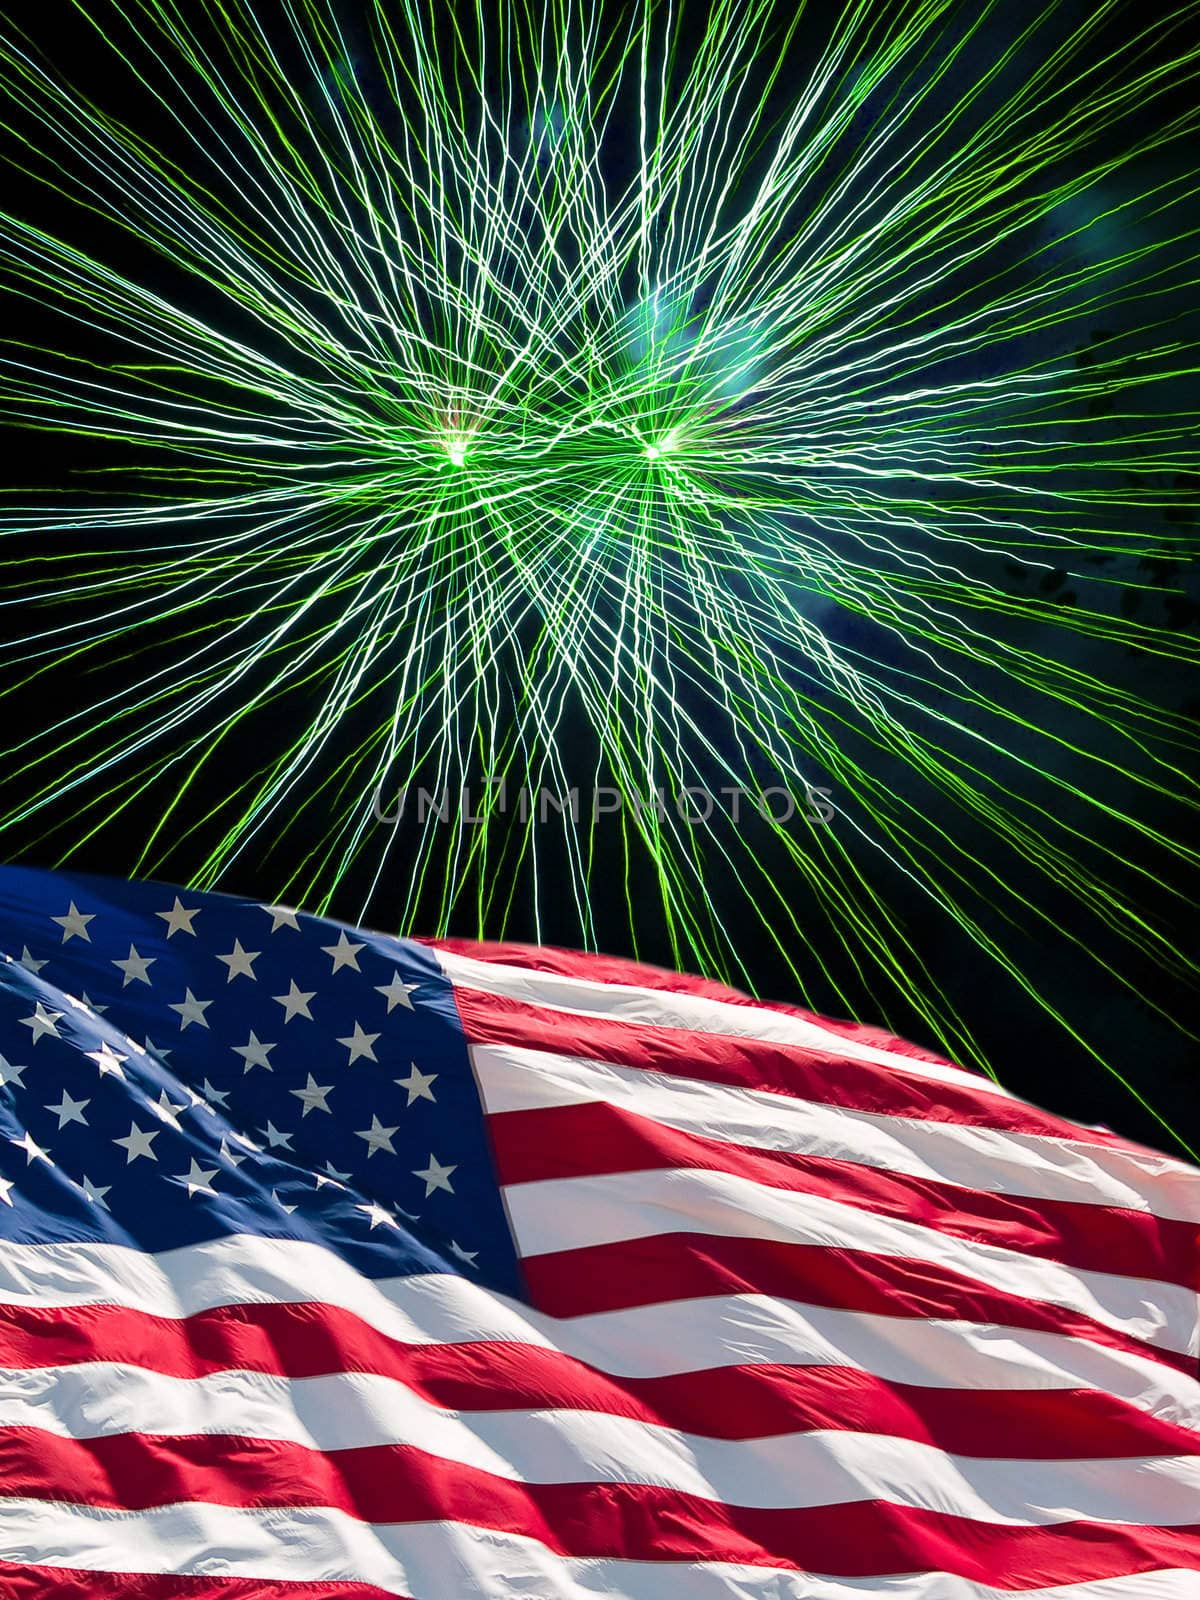 The American Flag and Green Fireworks from Independence Day